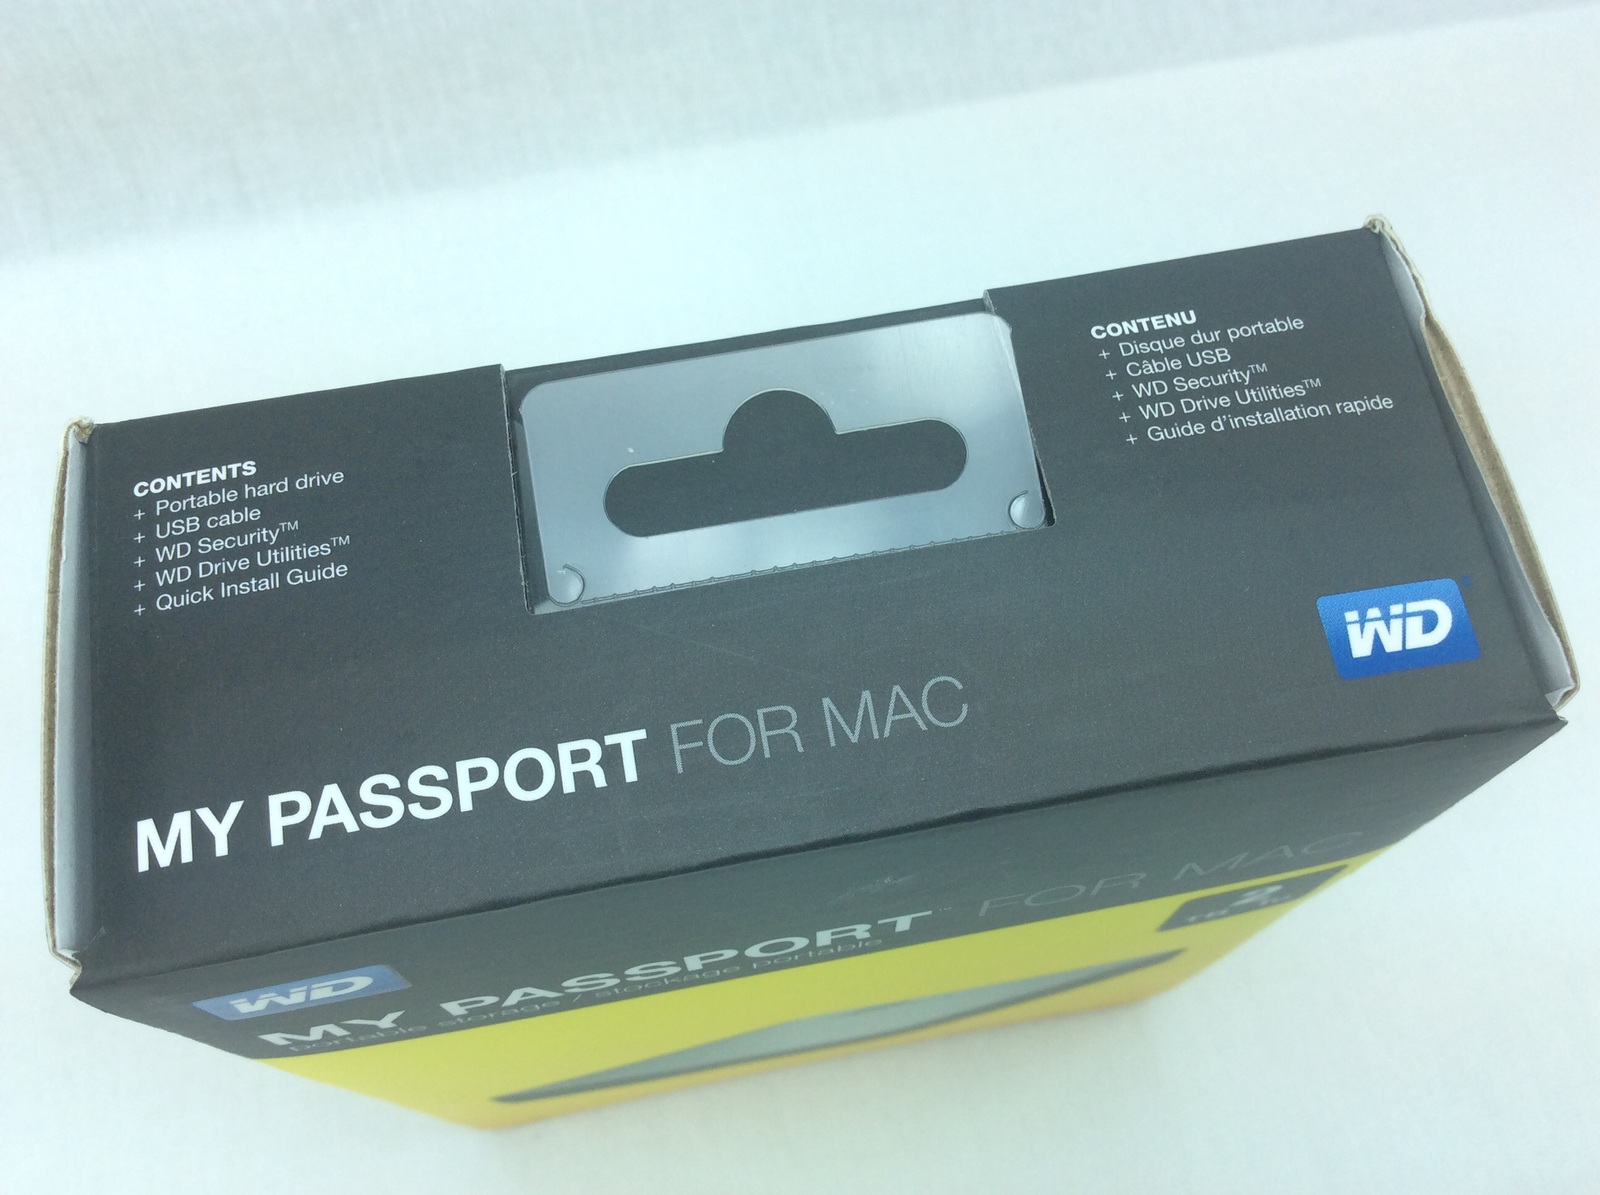 find my passport harddrive for mac